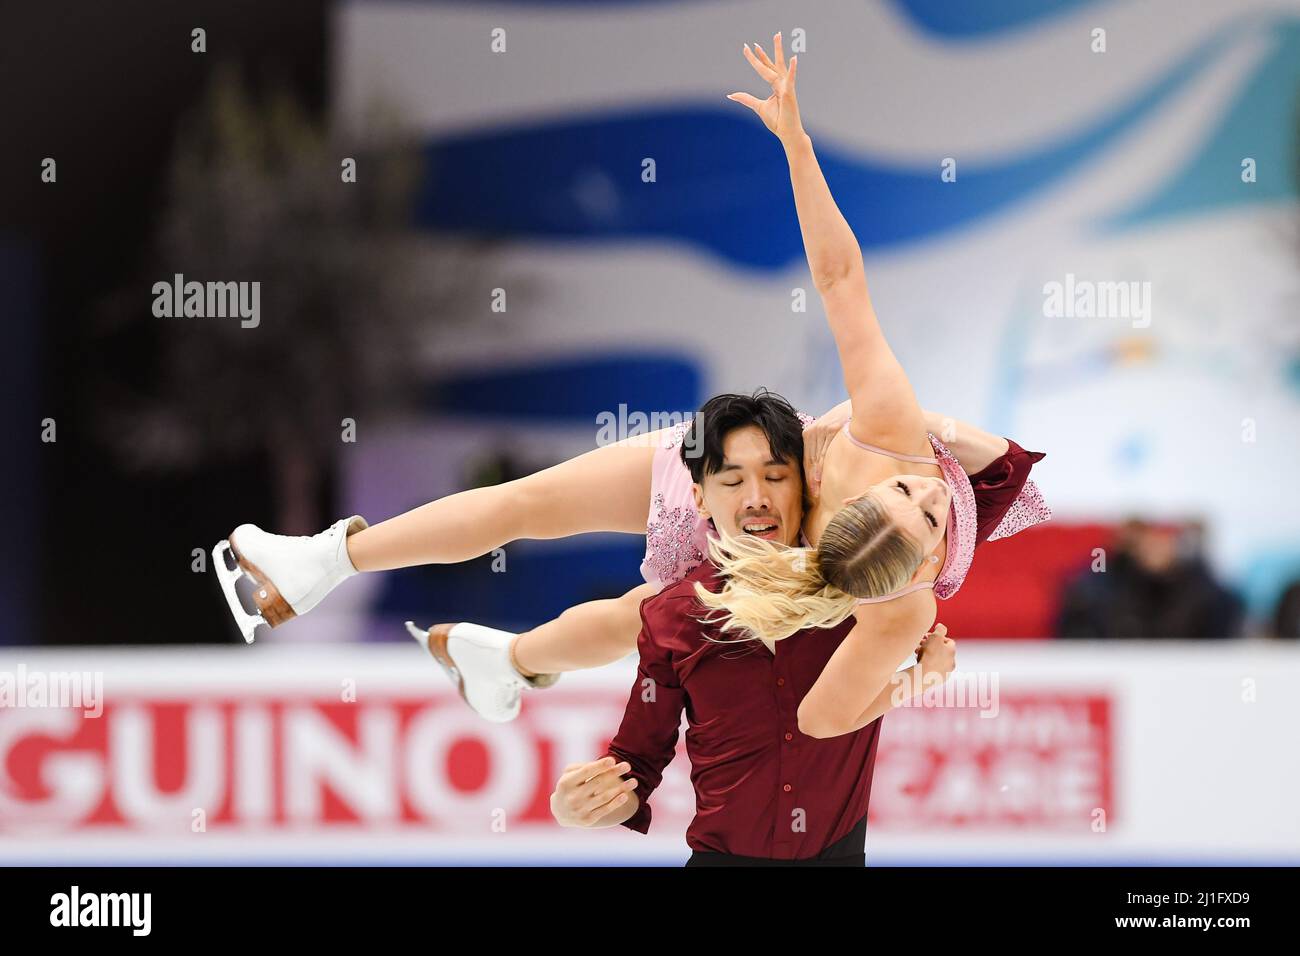 Holly HARRIS and Jason CHAN (AUS), during Ice Dance Rhythm Dance, at the ISU World Figure Skating Championships 2022 at Sud de France Arena, on March 25, 2022 in Montpellier Occitanie, France.